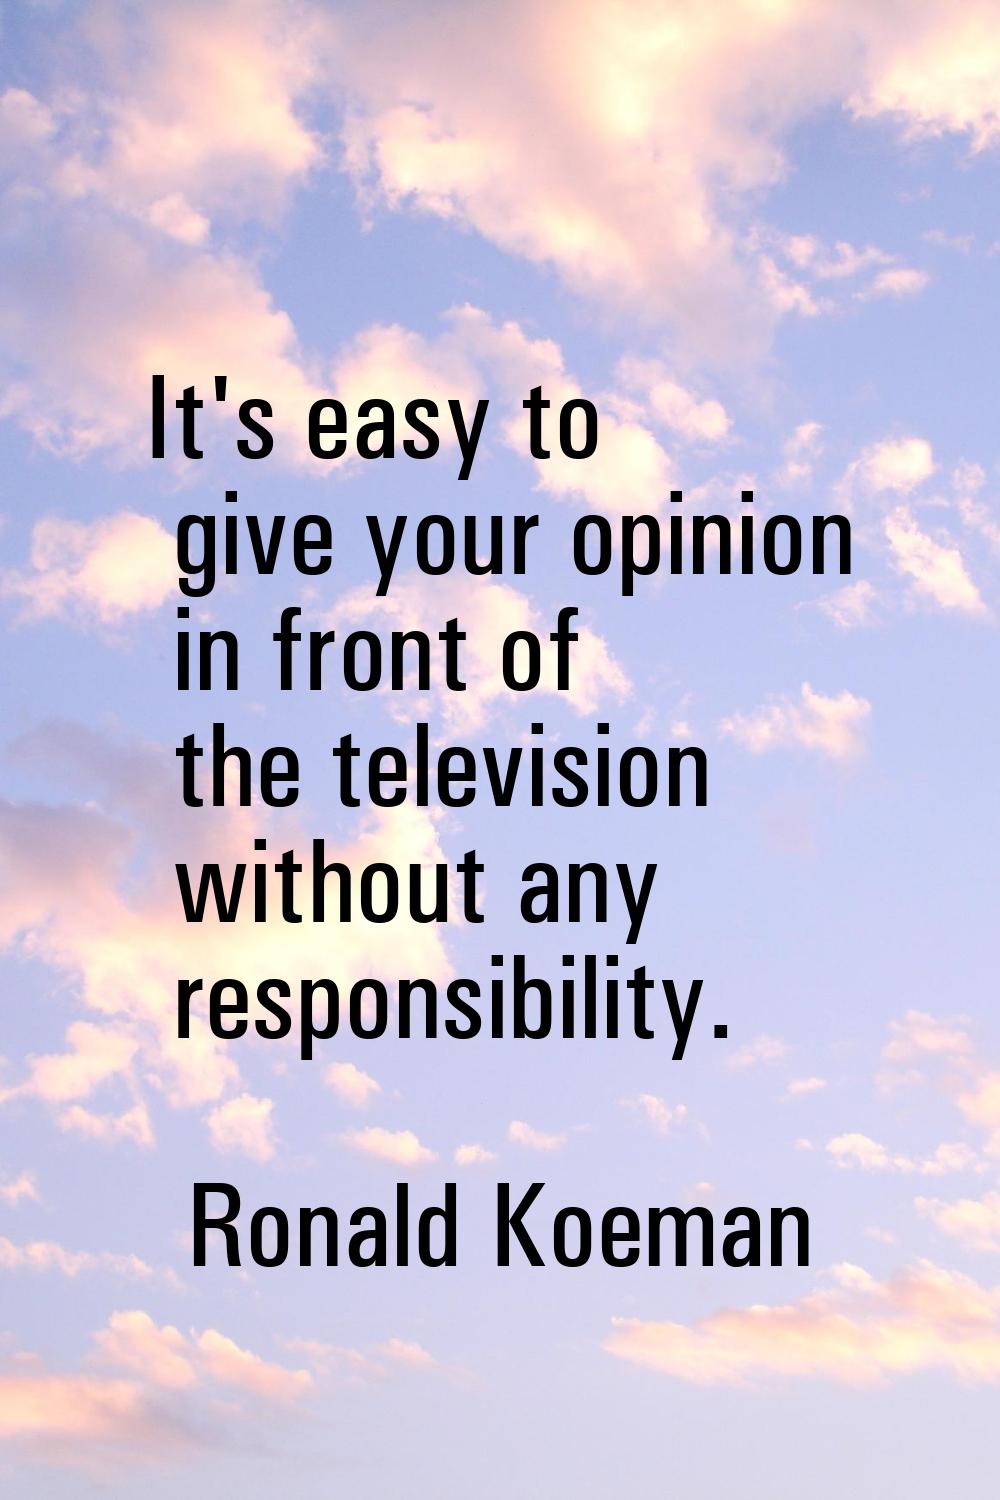 It's easy to give your opinion in front of the television without any responsibility.